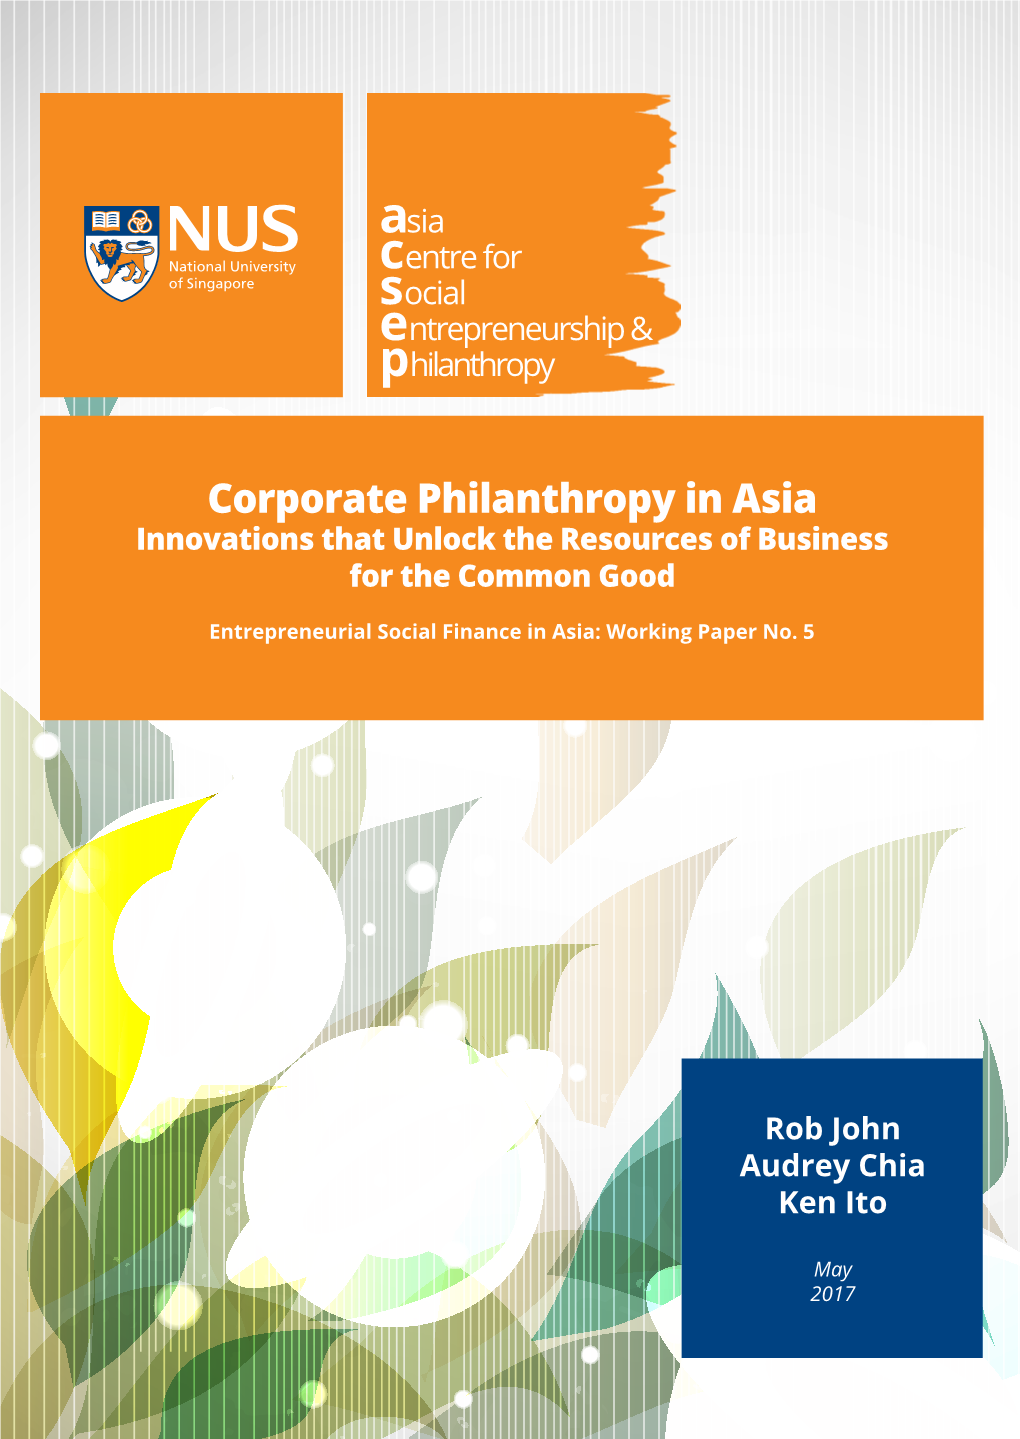 Corporate Philanthropy in Asia: Innovations That Unlock the Resources of Business for the Common Good